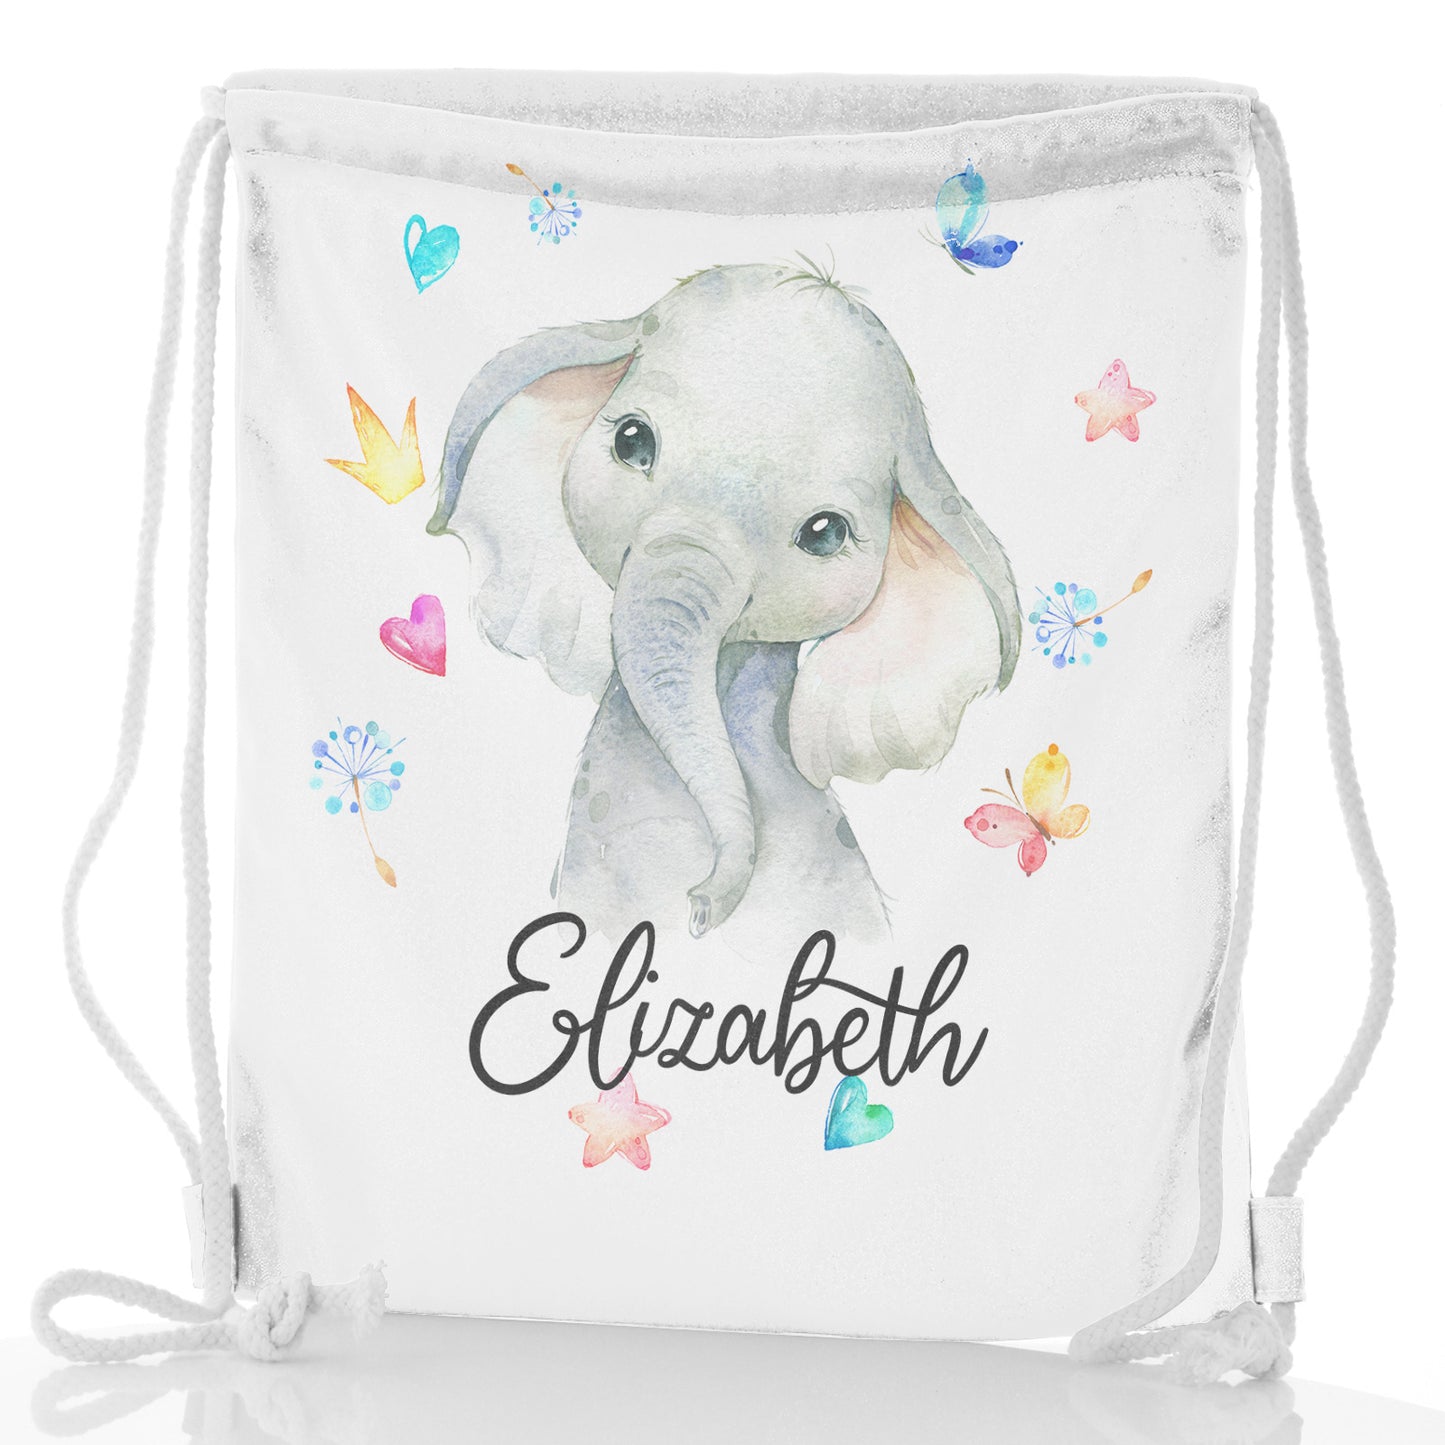 Personalised Glitter Drawstring Backpack with Grey Elephant with Hearts Stars Crowns Butterfly and Cute Text